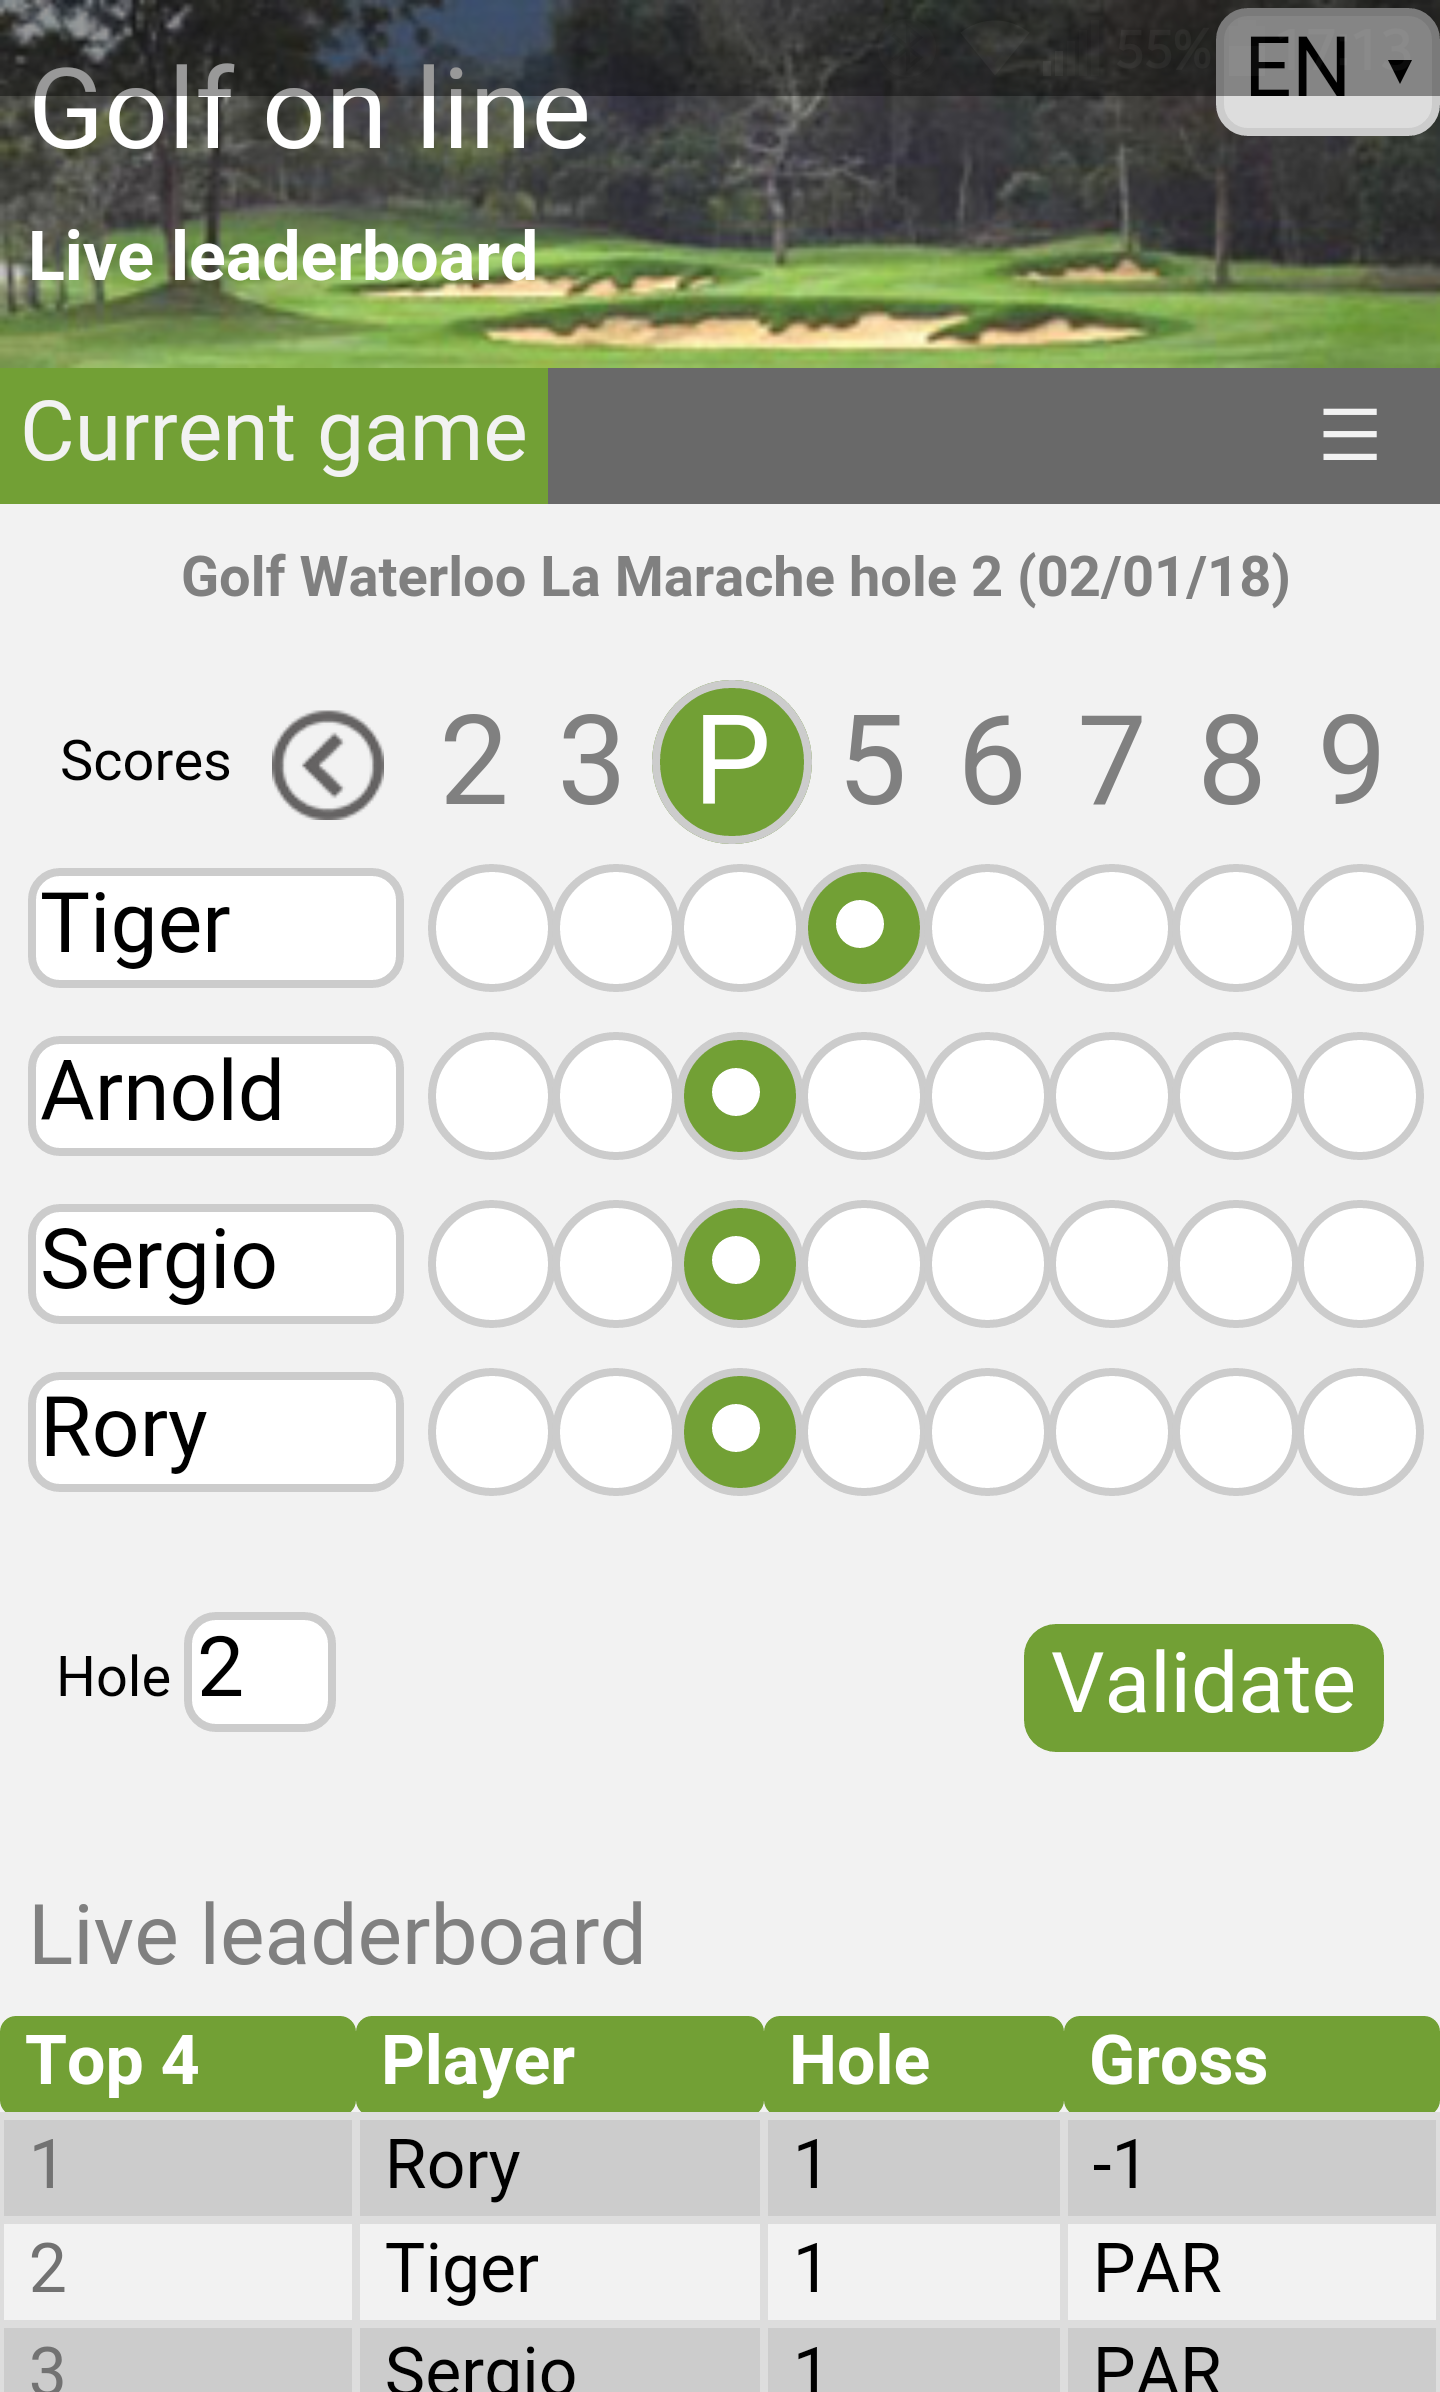 Live sharing my scores with the other golfers